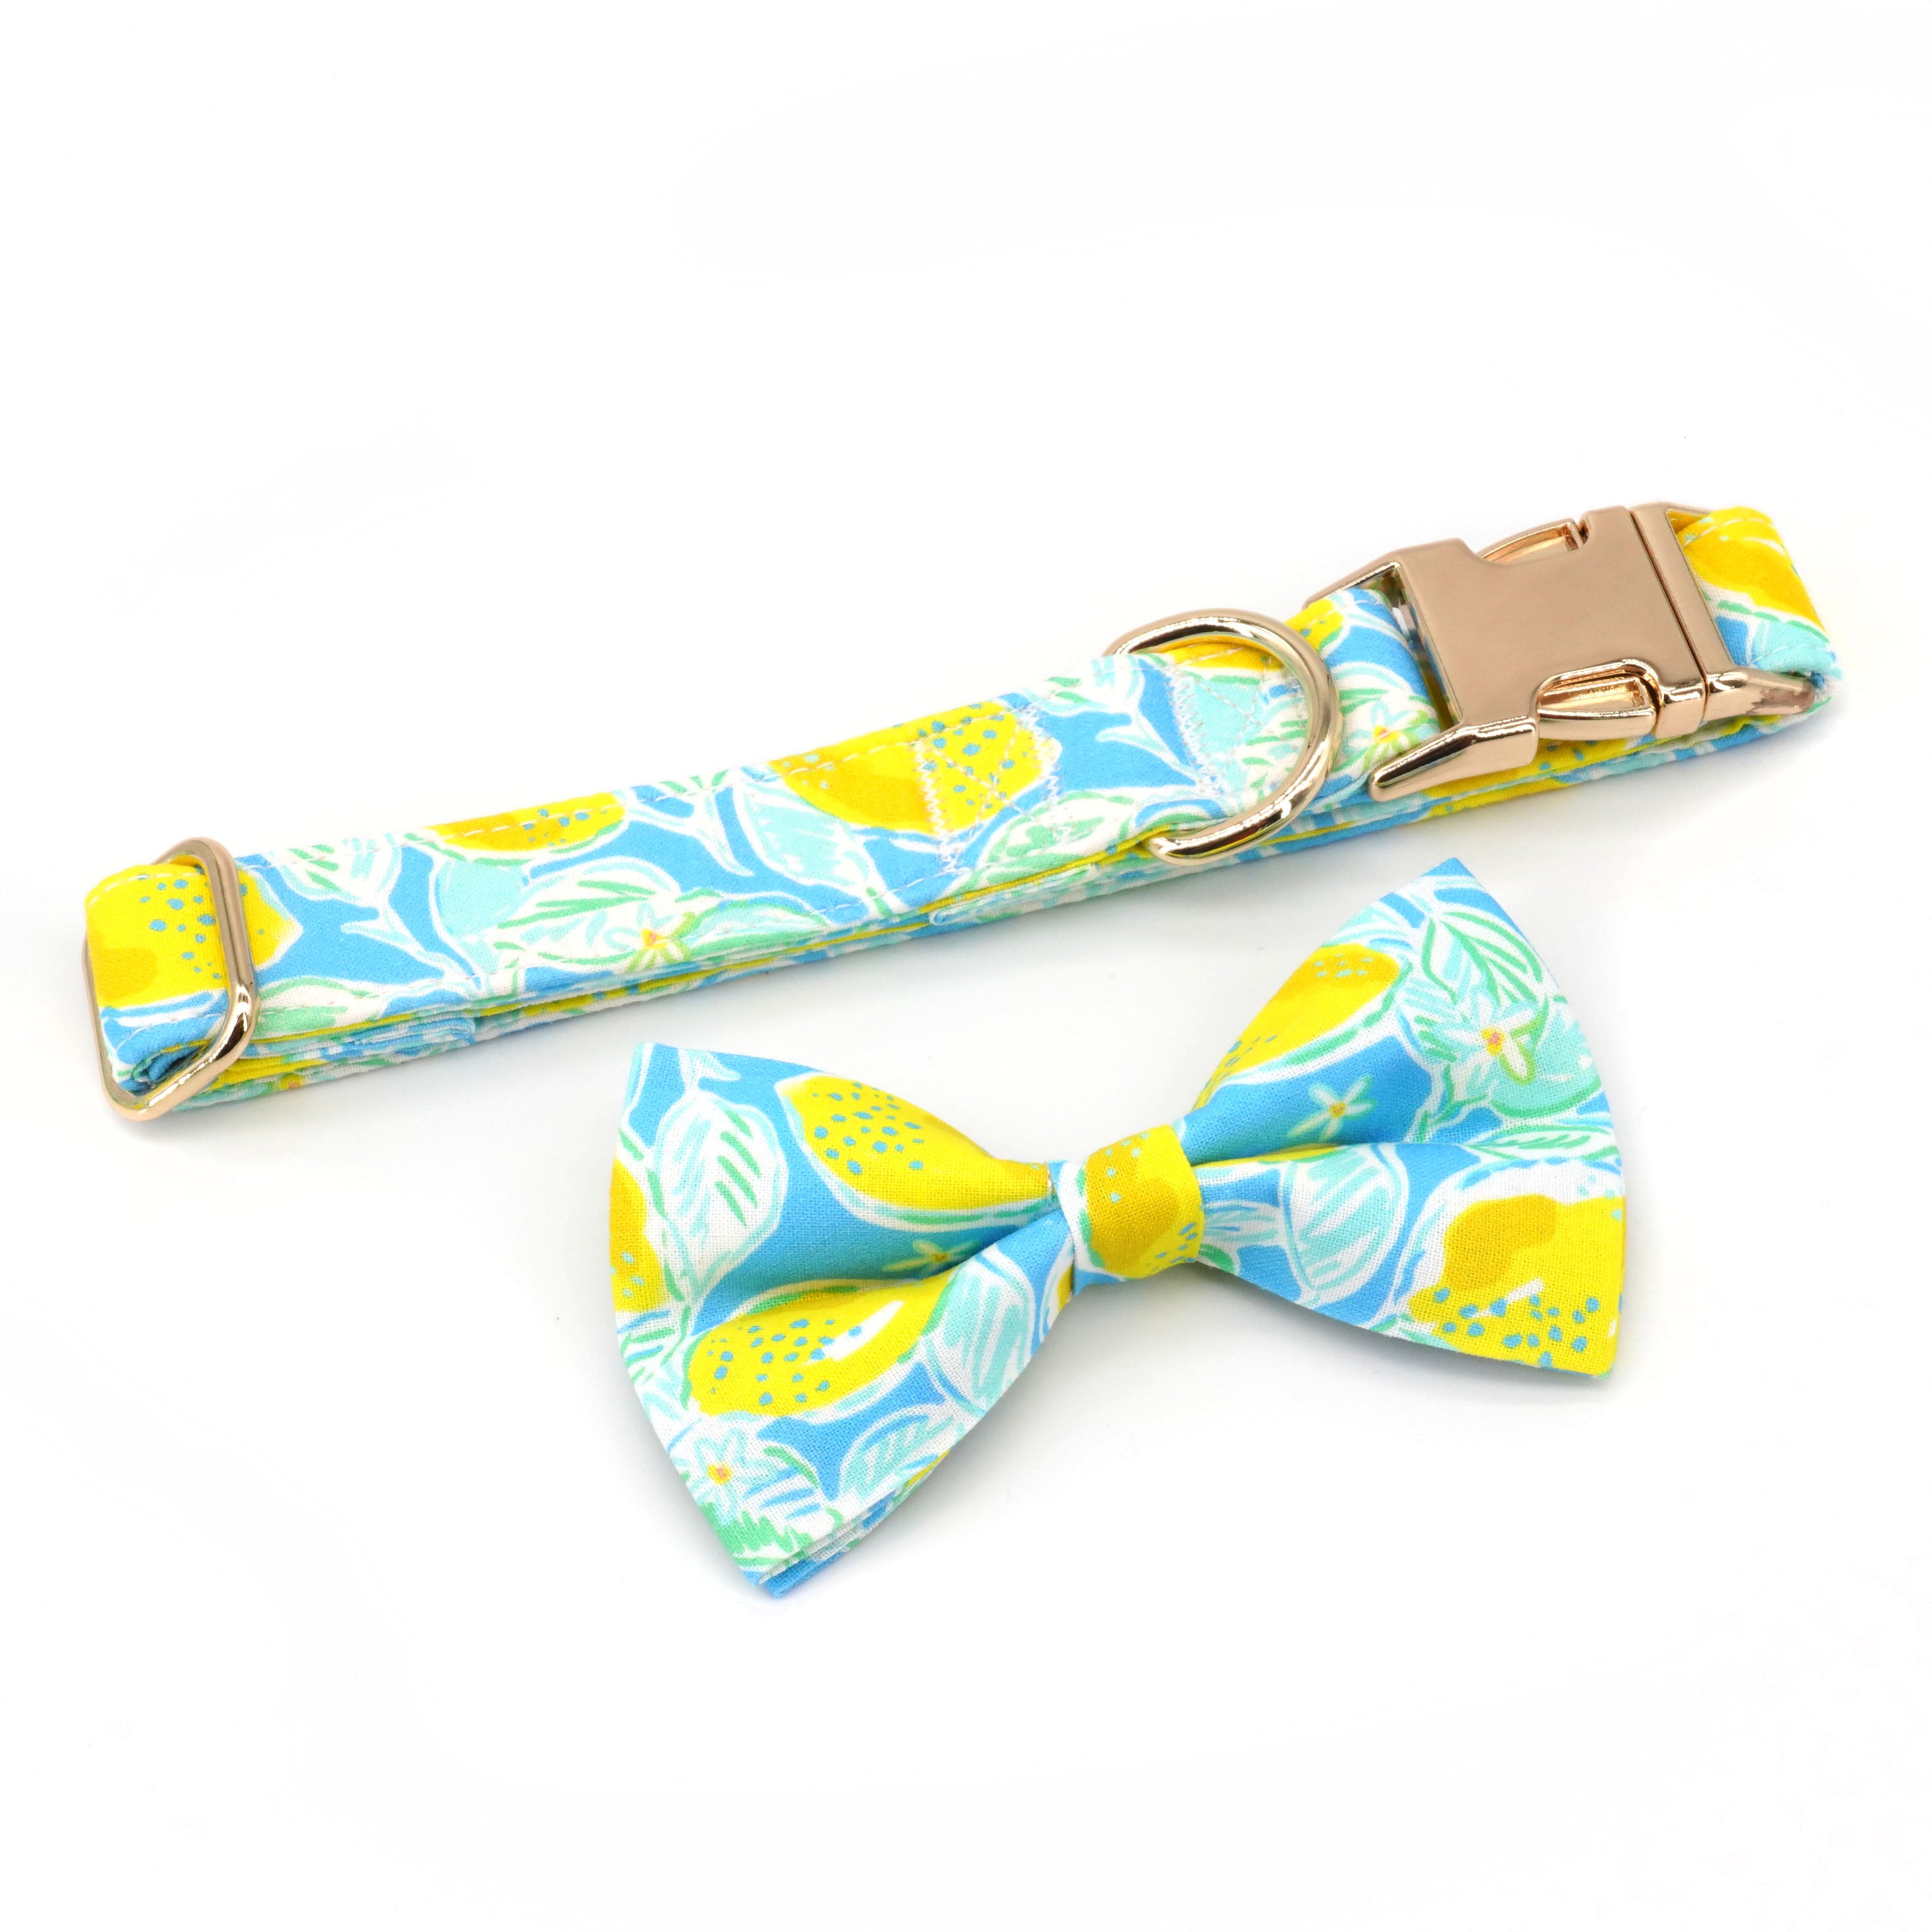 Summer Lemon Dog Collar Bowtie with Matching Leash | Personalized